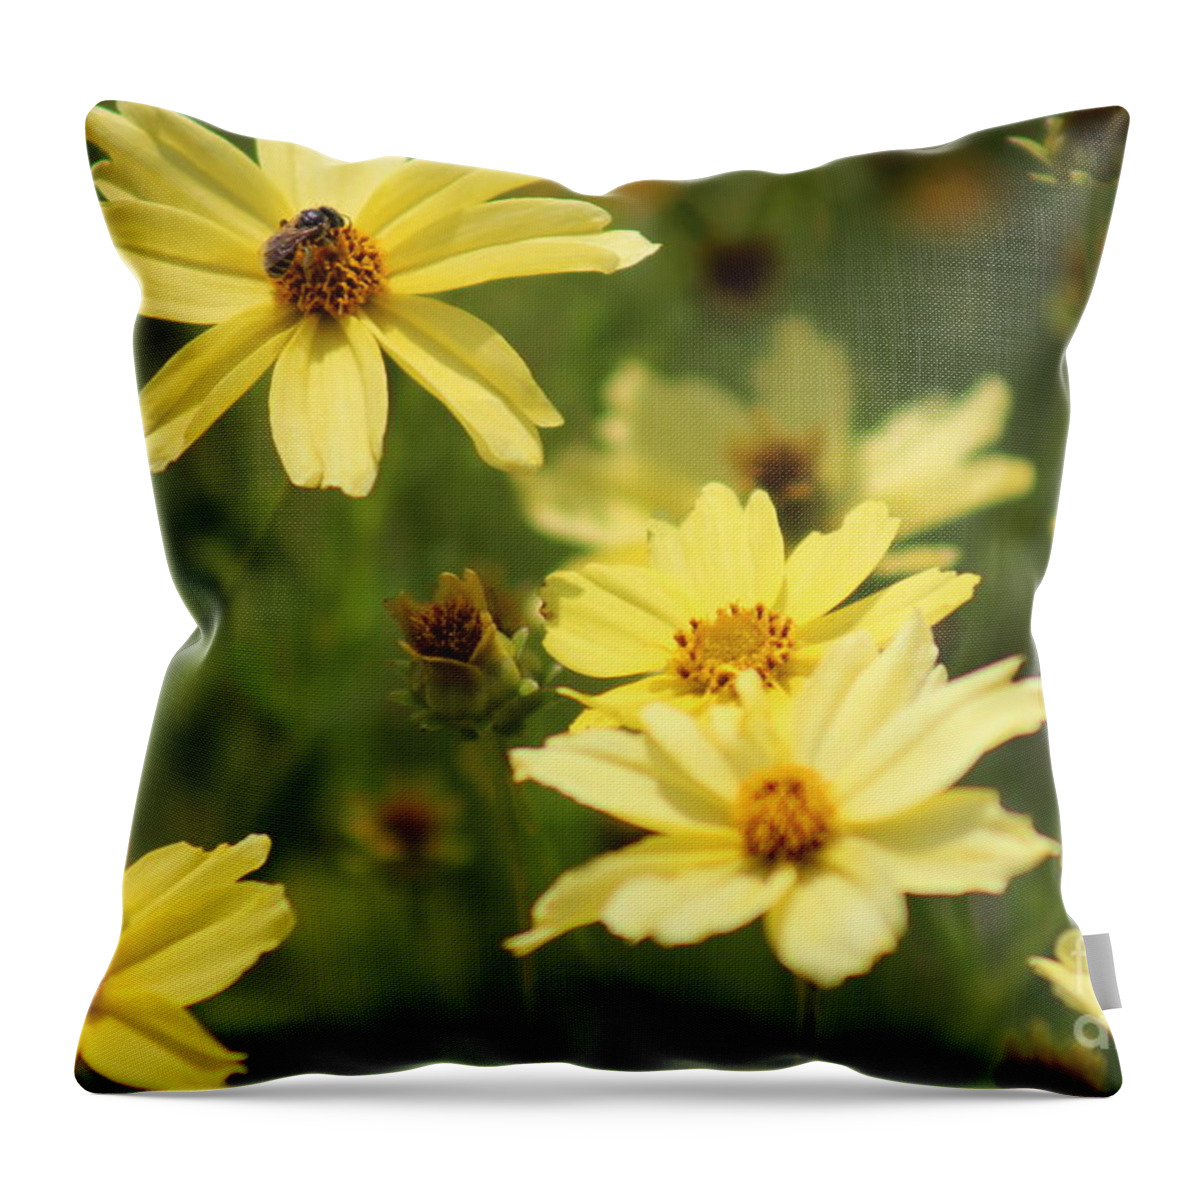 Yellow Throw Pillow featuring the photograph Nature's Beauty 63 by Deena Withycombe